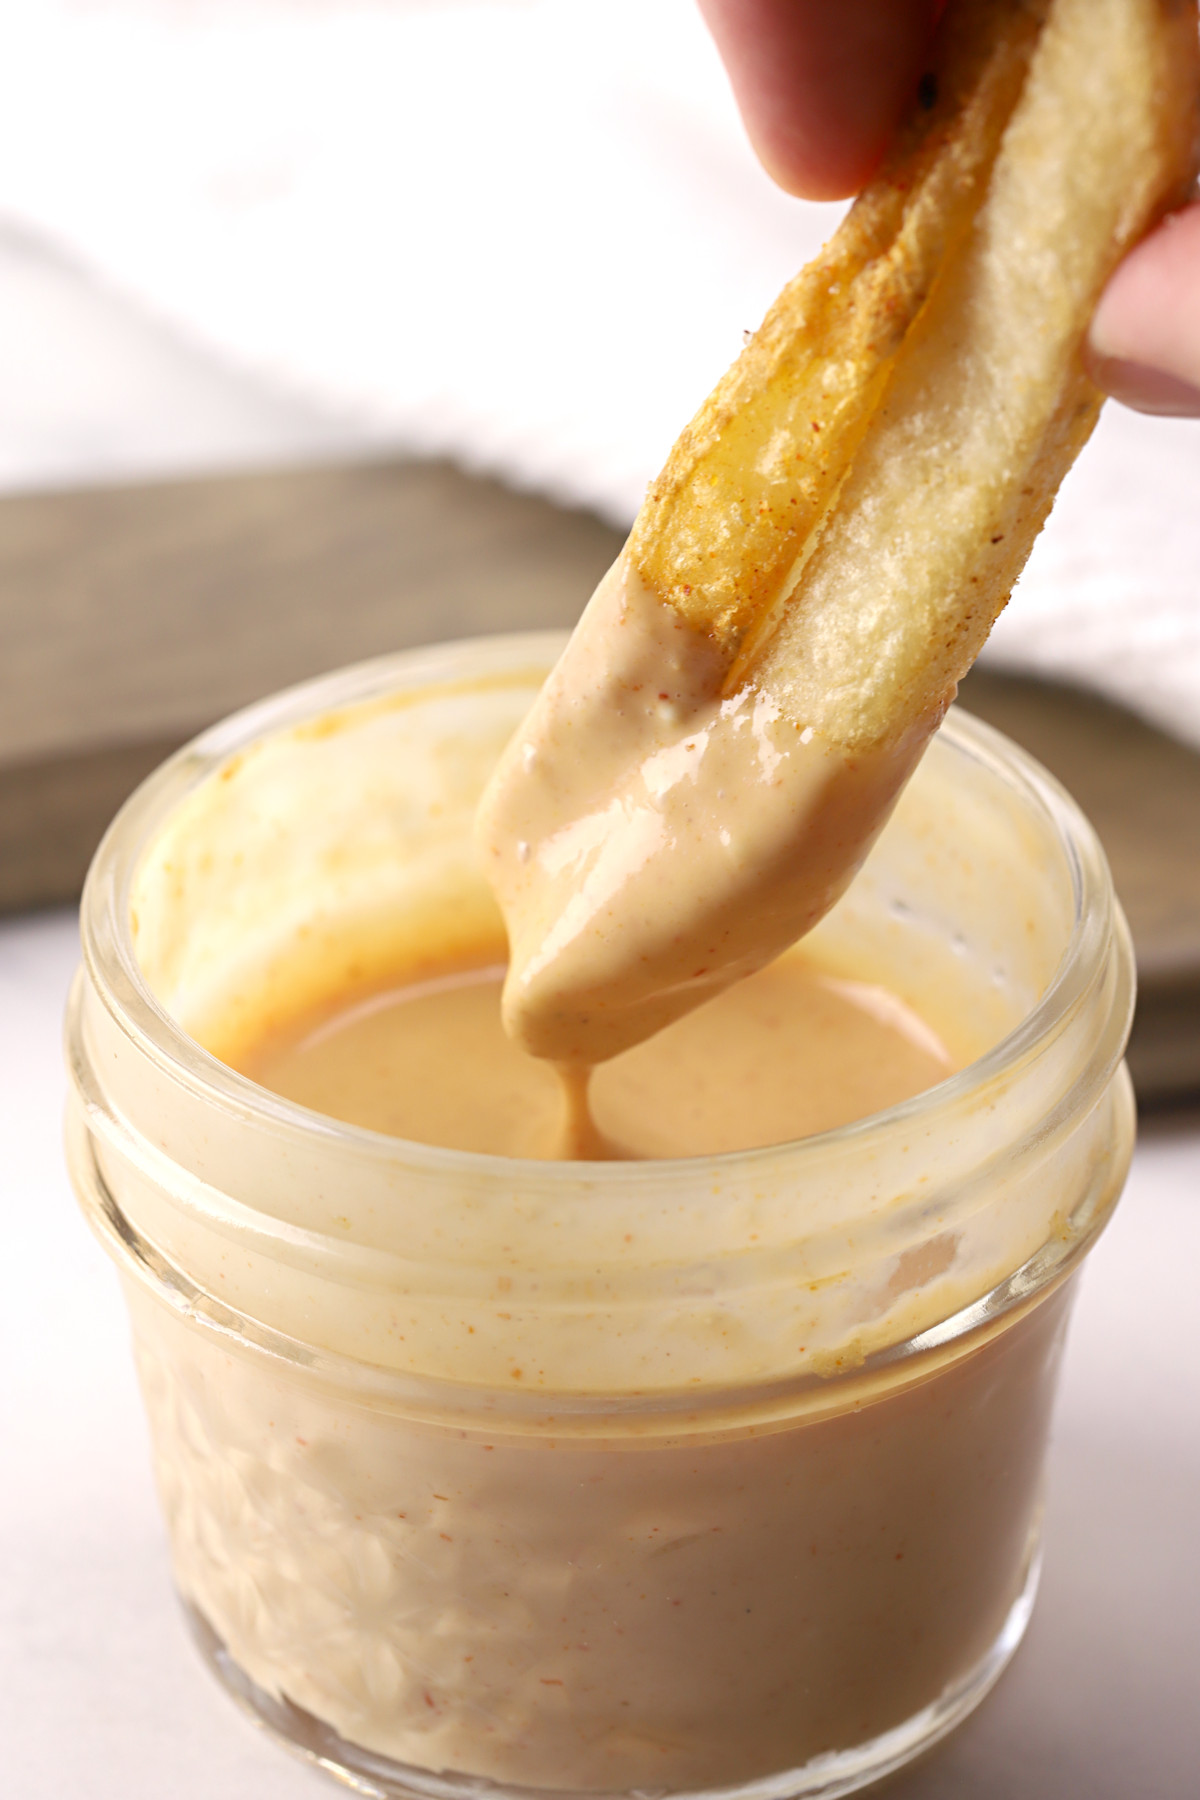 Dipping fries in a jar of burger sauce.